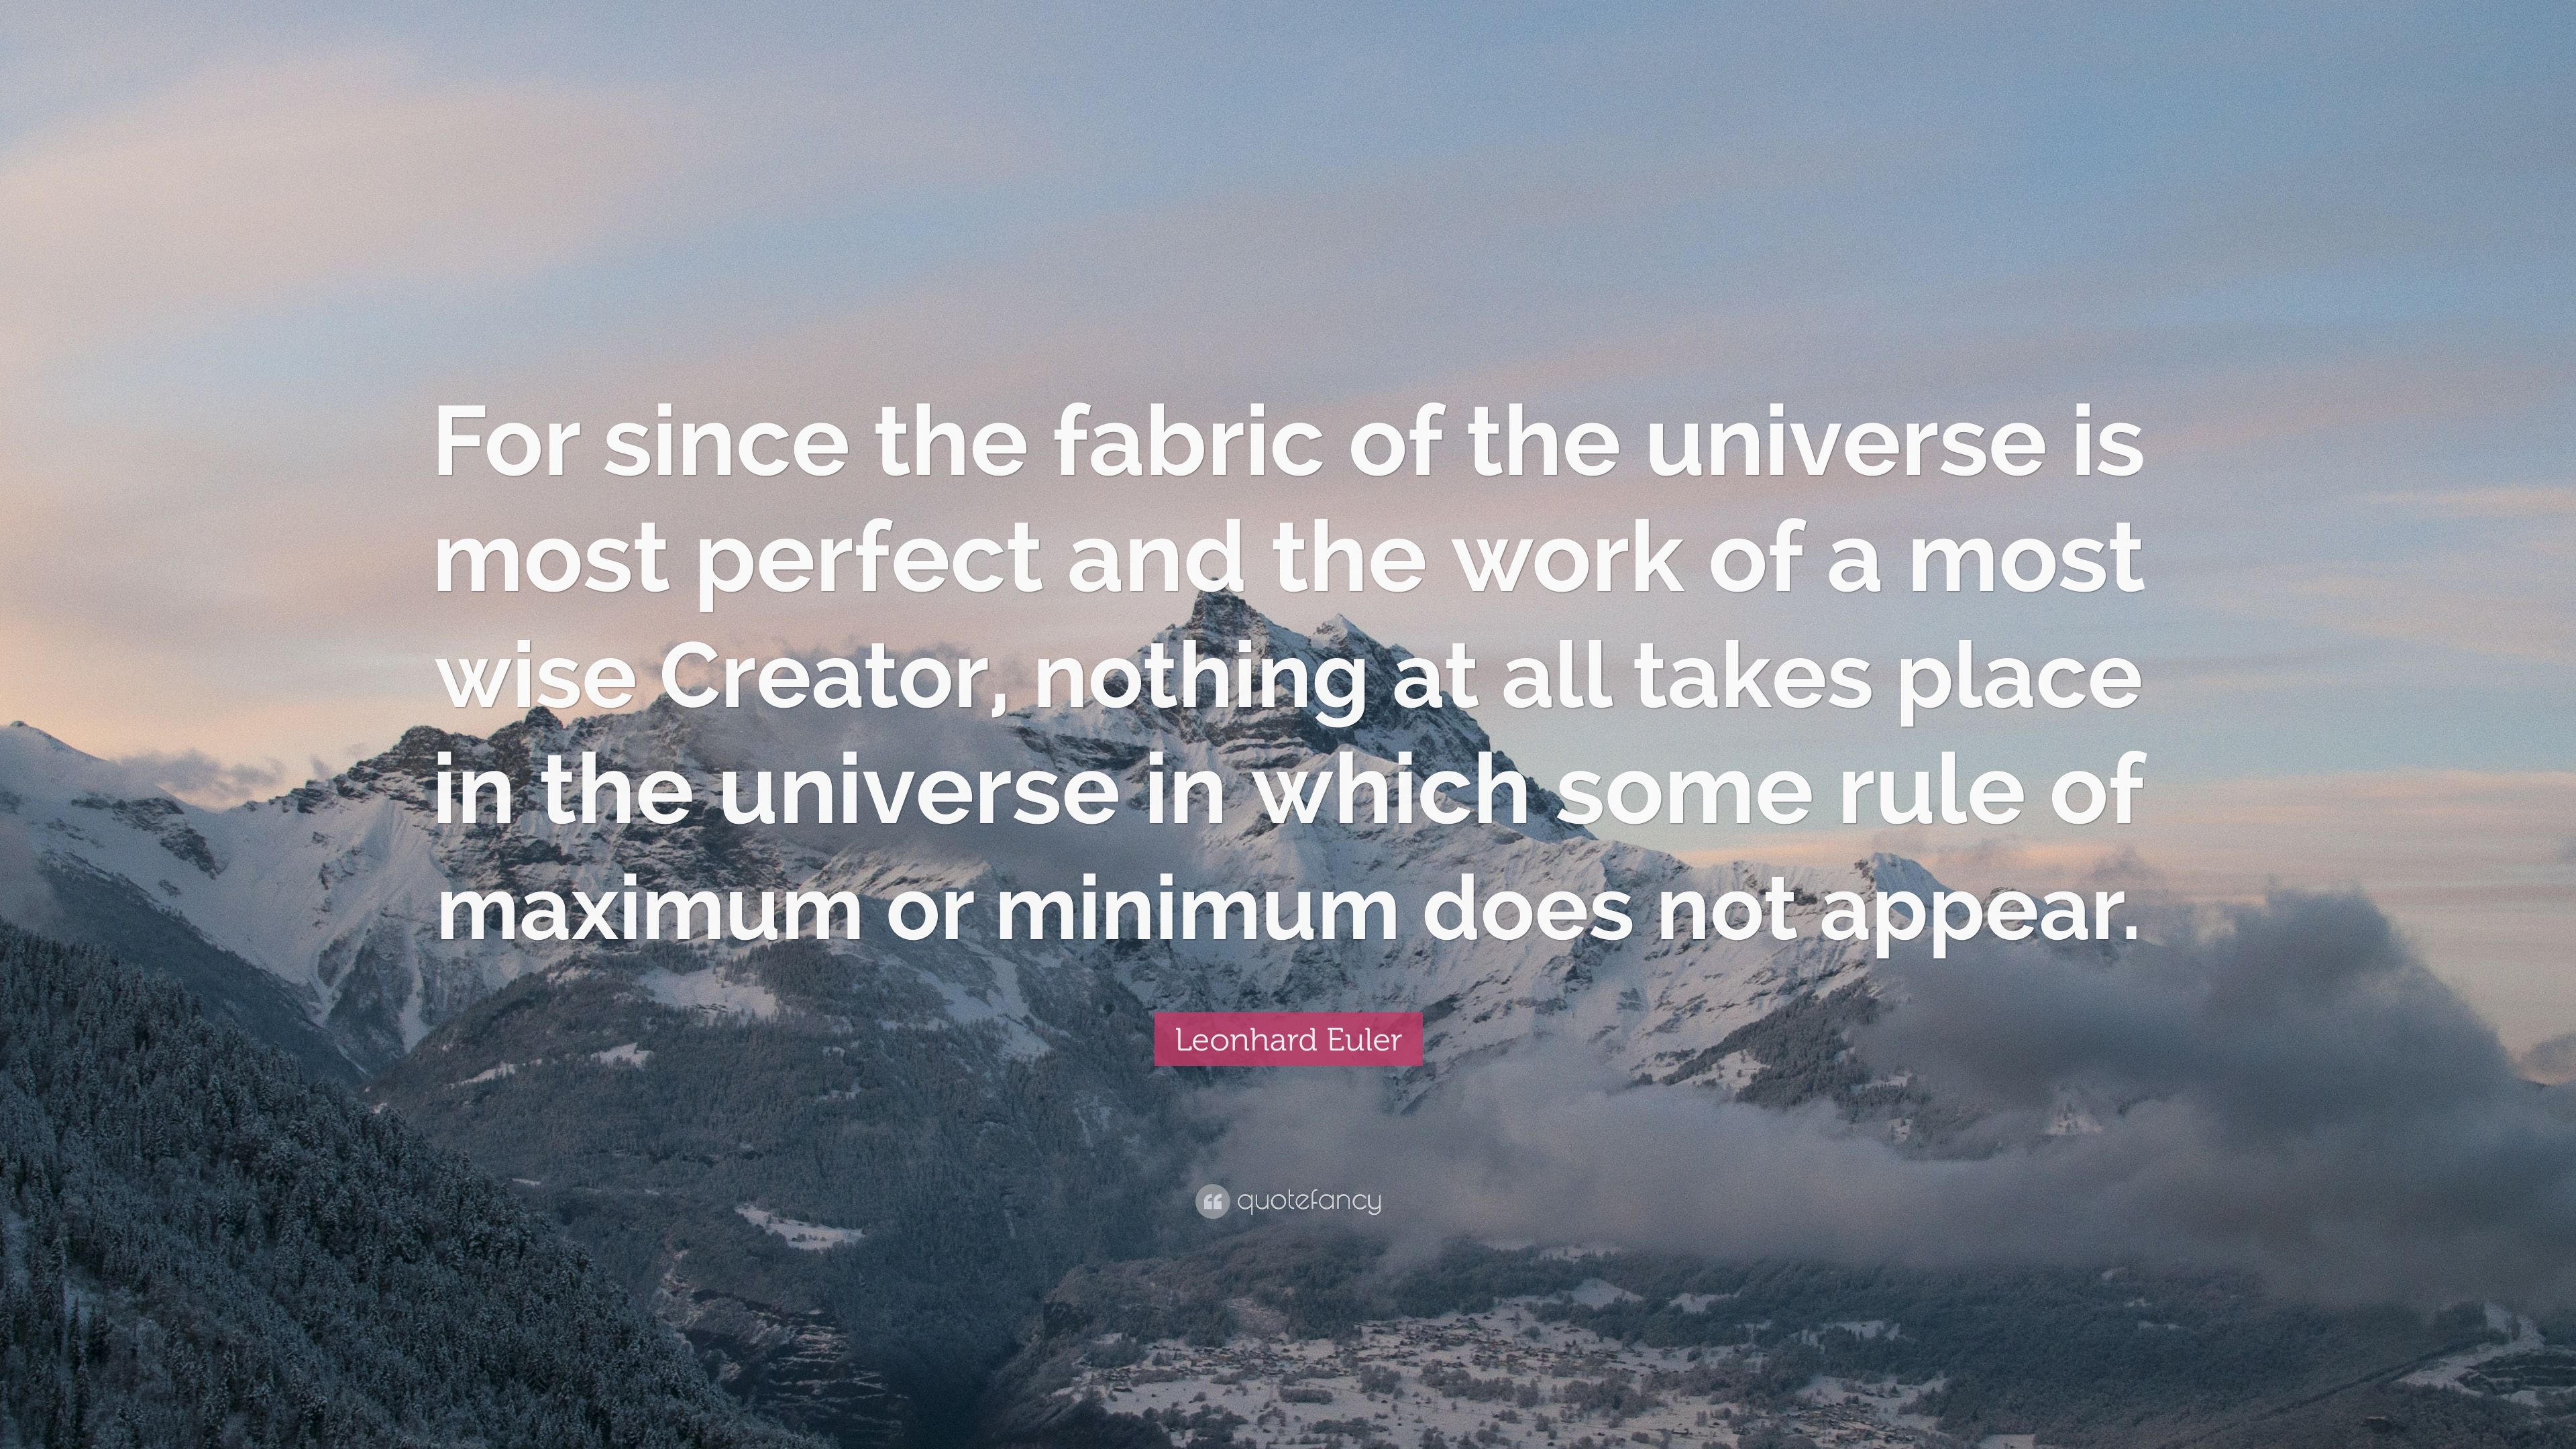 Leonhard Euler Quote: “For since the fabric of the universe is most perfect and the work of a most wise Creator, nothing at all takes place in .” (7 wallpaper)